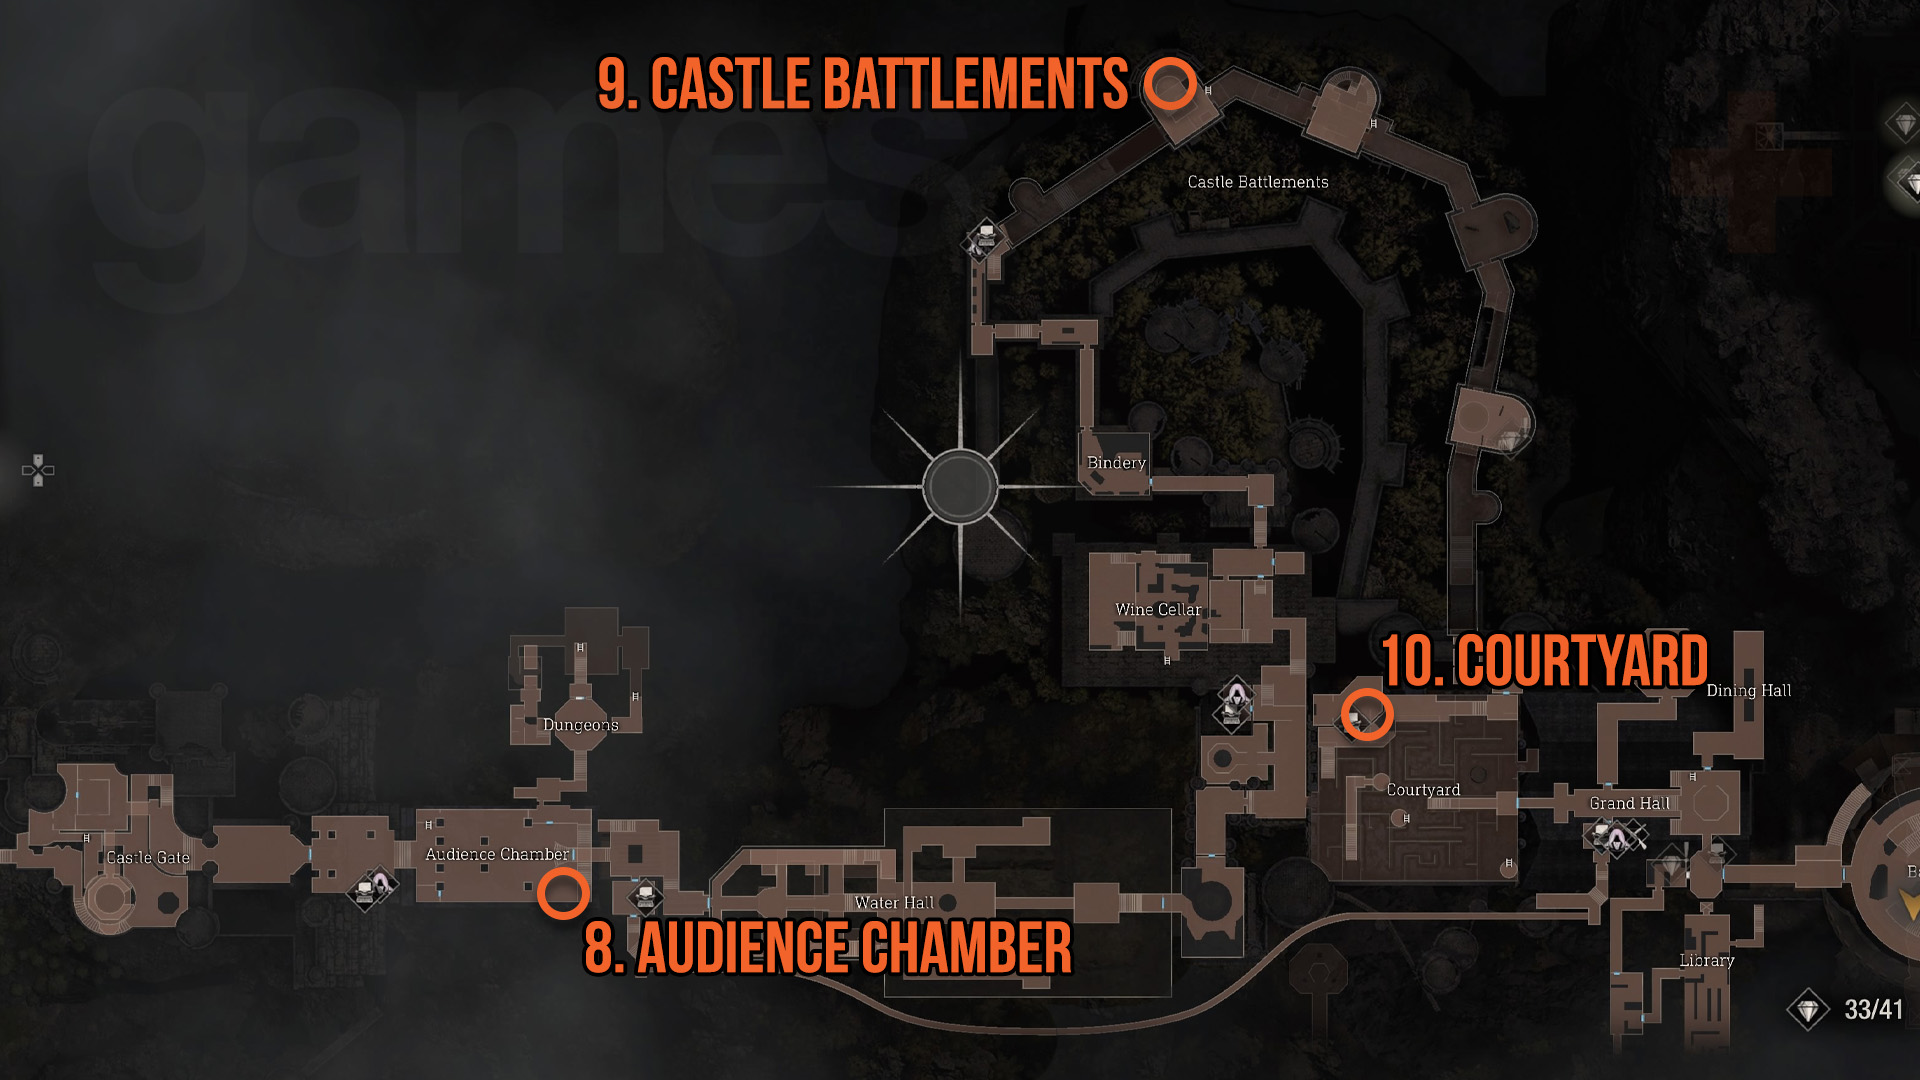 Resident Evil 4 Remake Yellow Herb map locations audience chamber, castle battlements, and courtyard